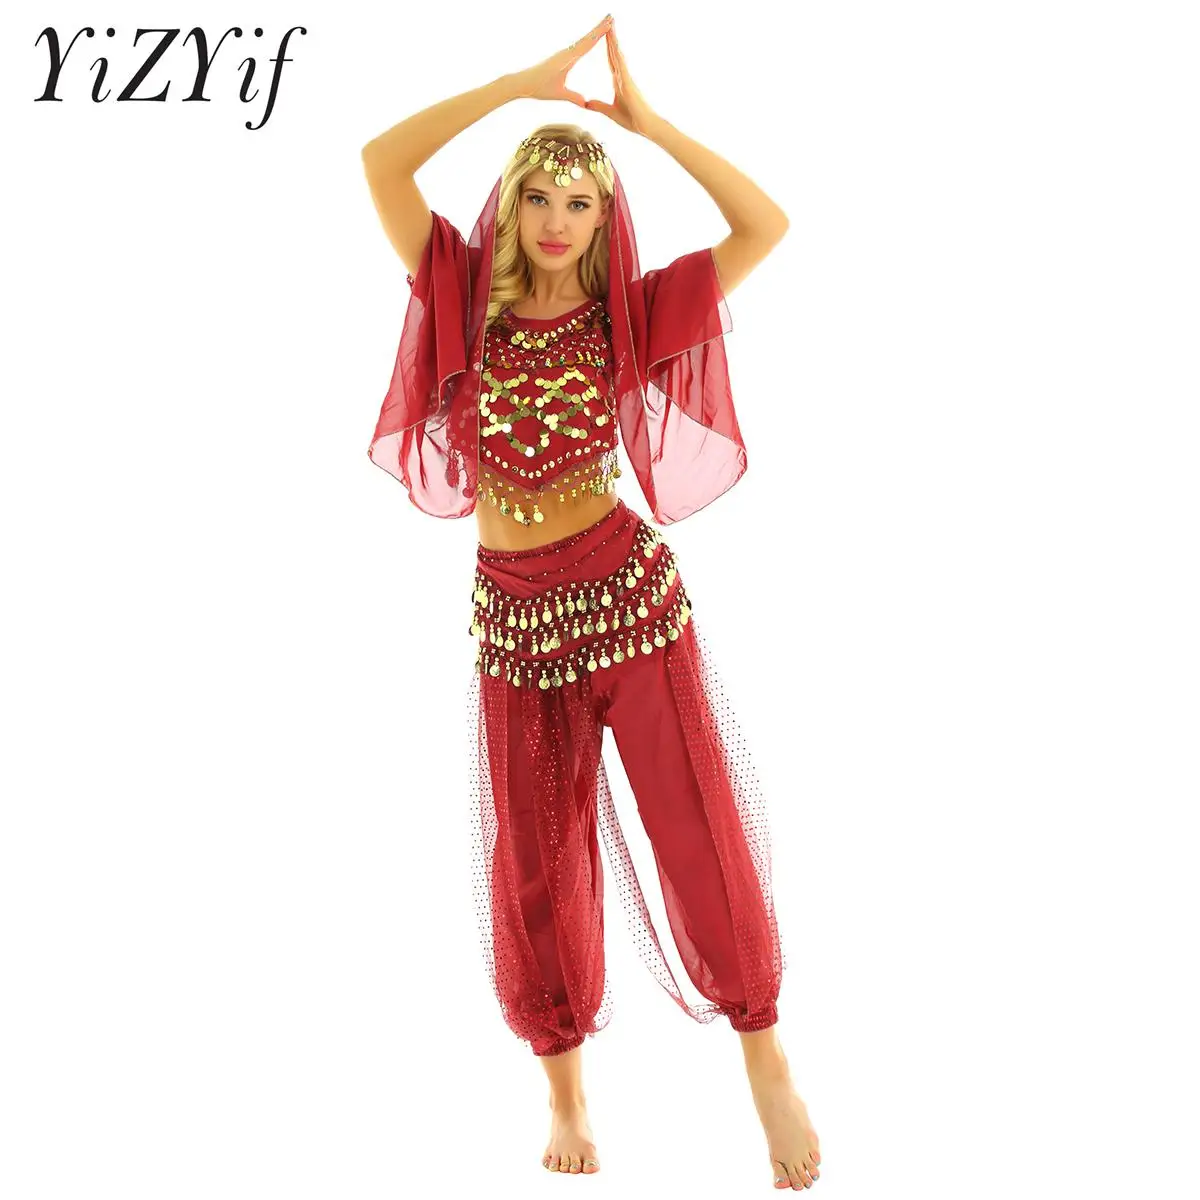 

Women Arabian Indian Princess Cosplay Dress Up Outfits Belly Dance Stage Performance Costume for Halloween Carnival Mardi Gras